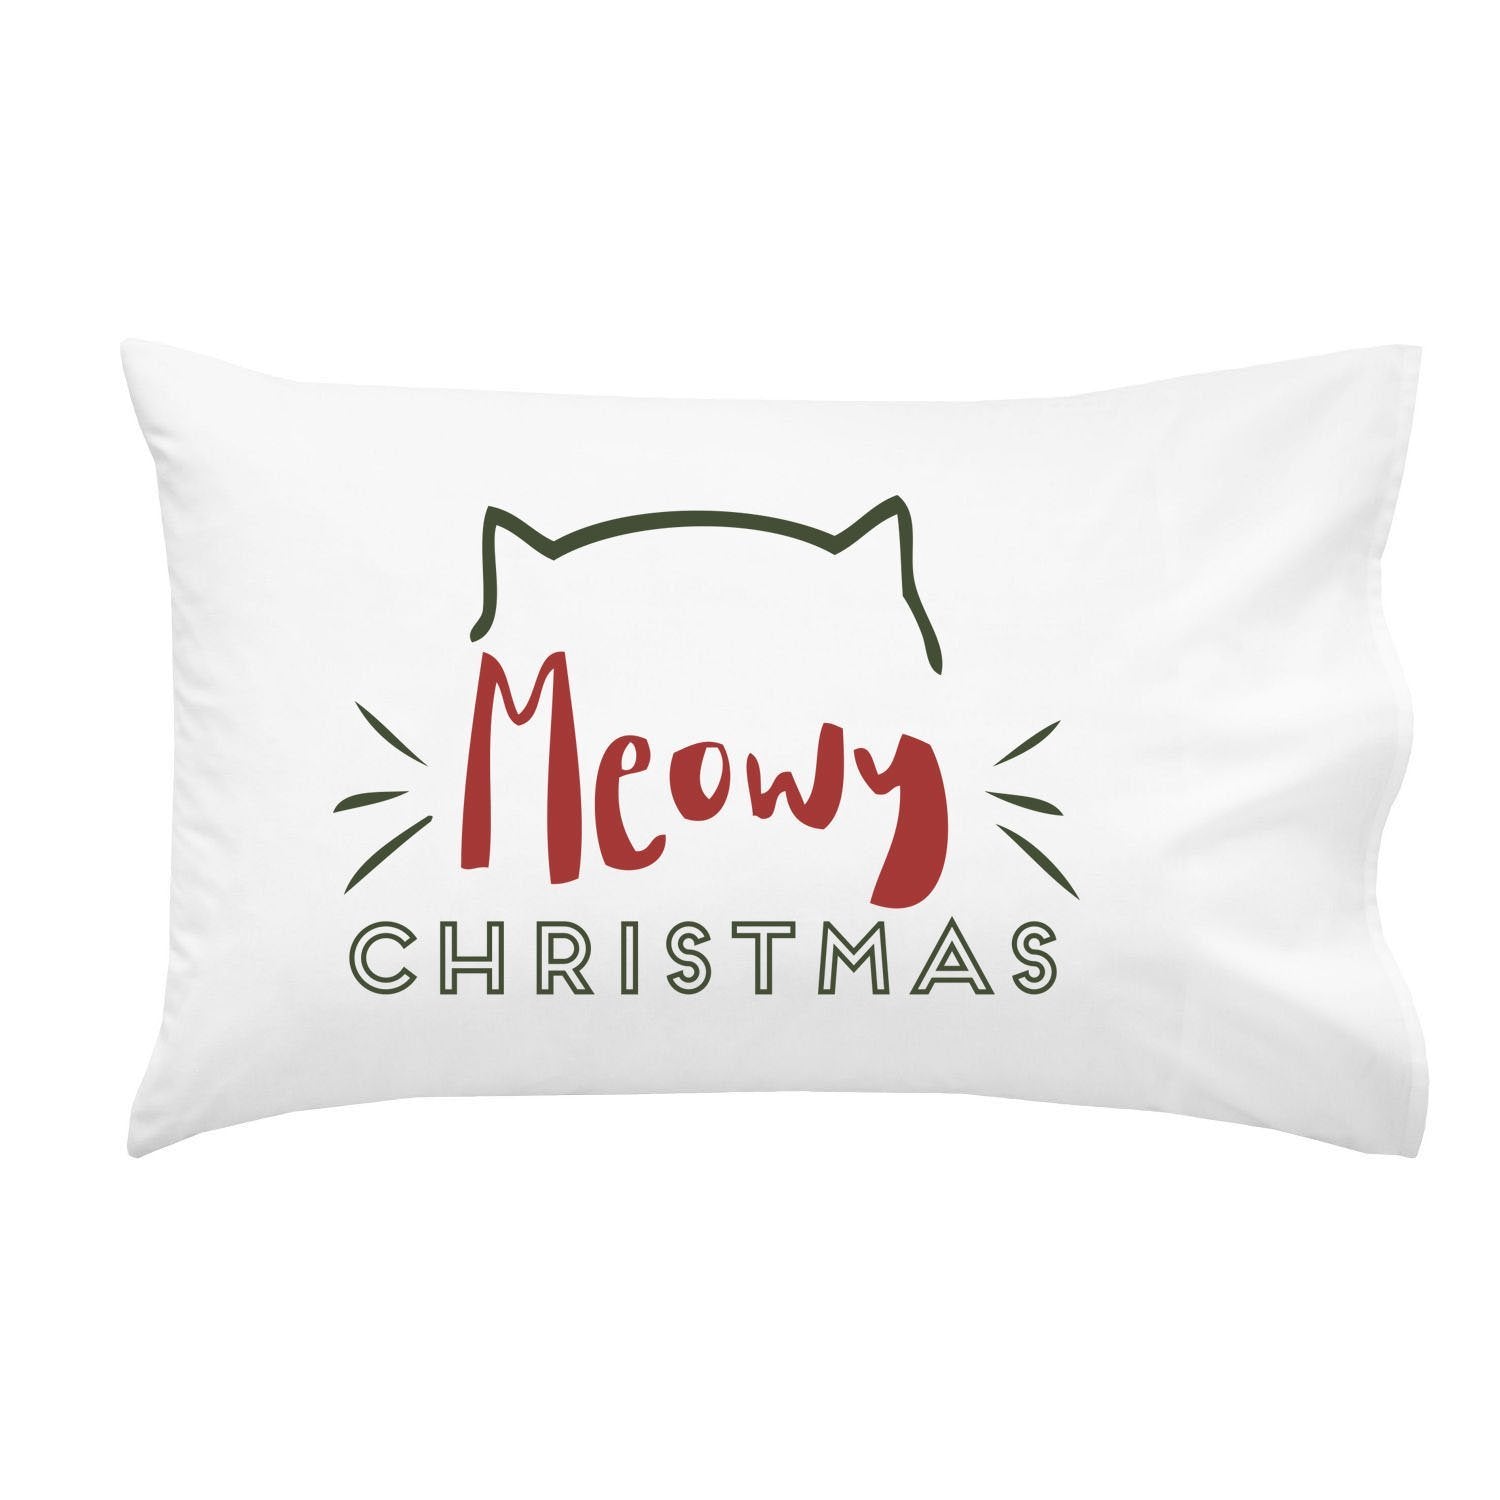 Meowy Christmas Pillowcases - Standard Size Pillow Case (1 20x30 inch, Black) Holiday Gifts